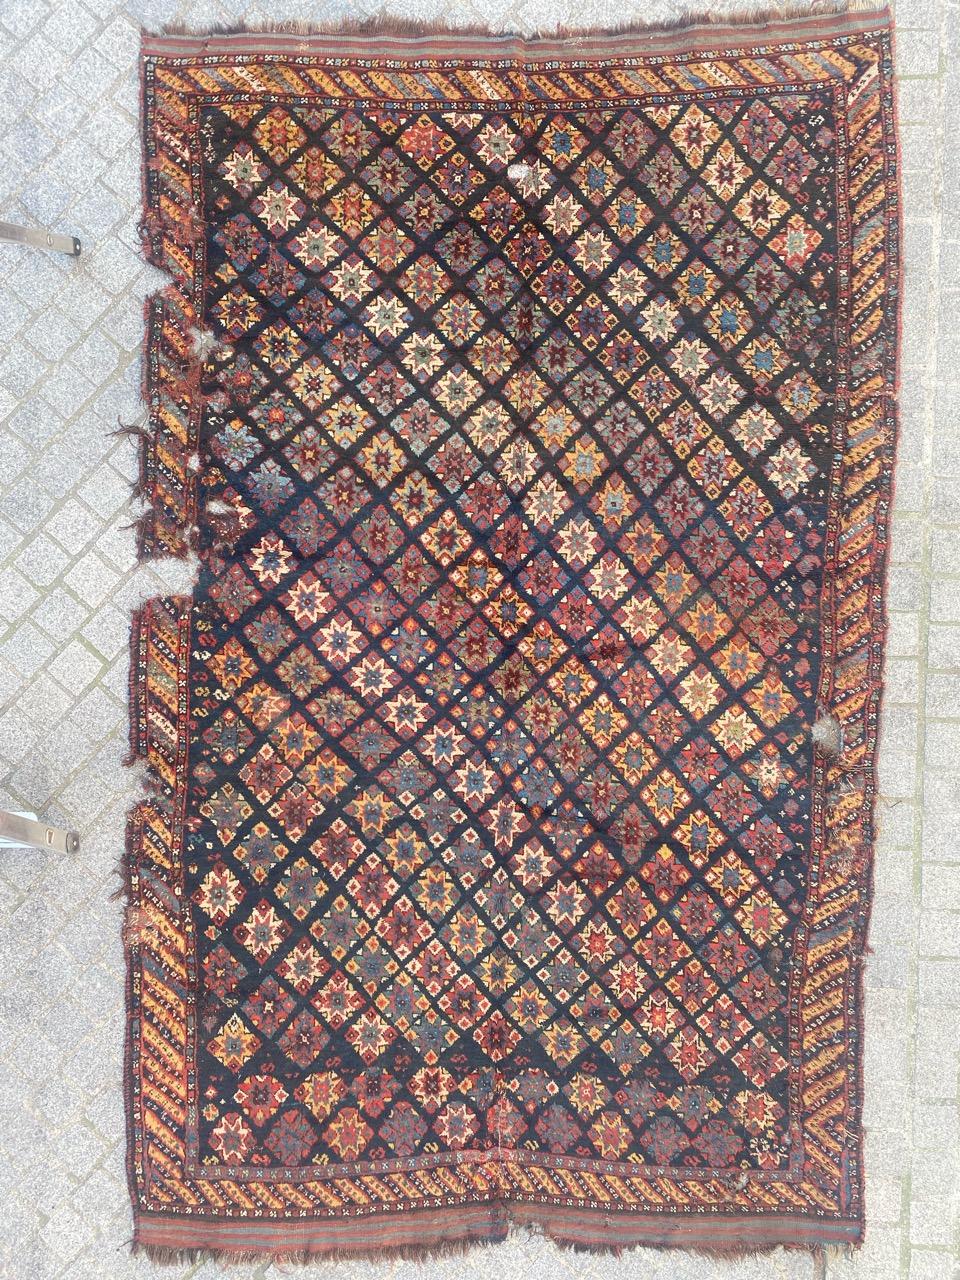 Wonderful antique tribal Lori rug with beautiful tribal geometrical design and nice natural colors. Entirely hand knotted with wool velvet on wool foundation.

✨✨✨
